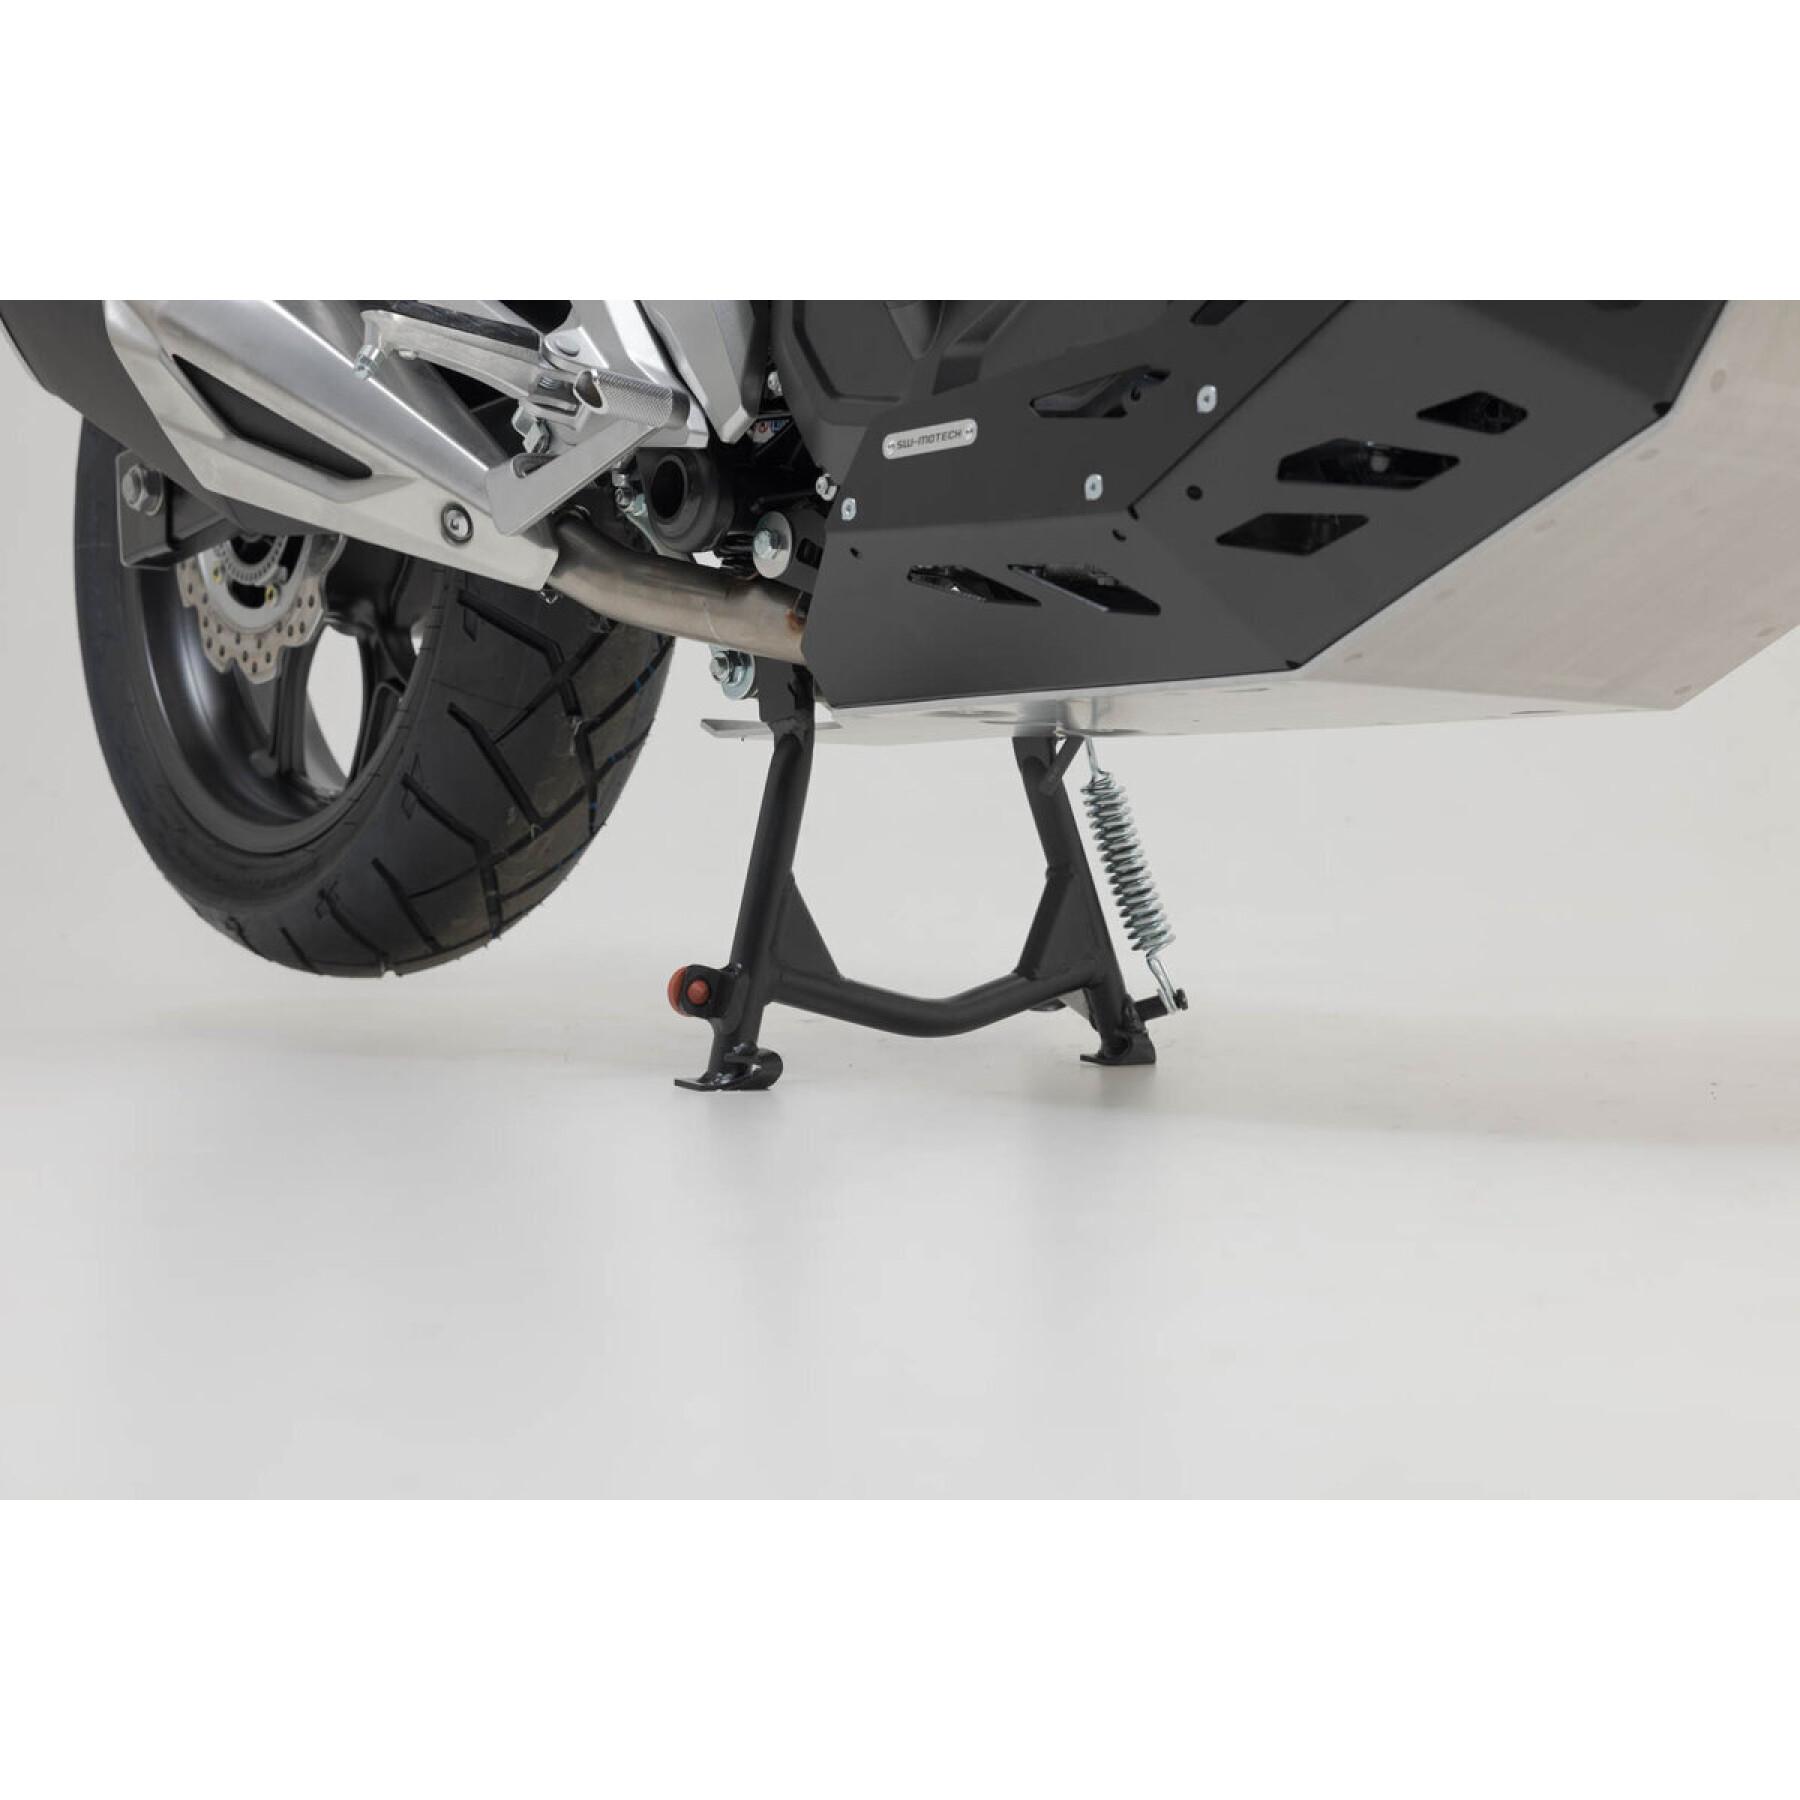 Motorcycle center stand SW-Motech NC700S (11-14), NC750S (14-)/ X (20-)